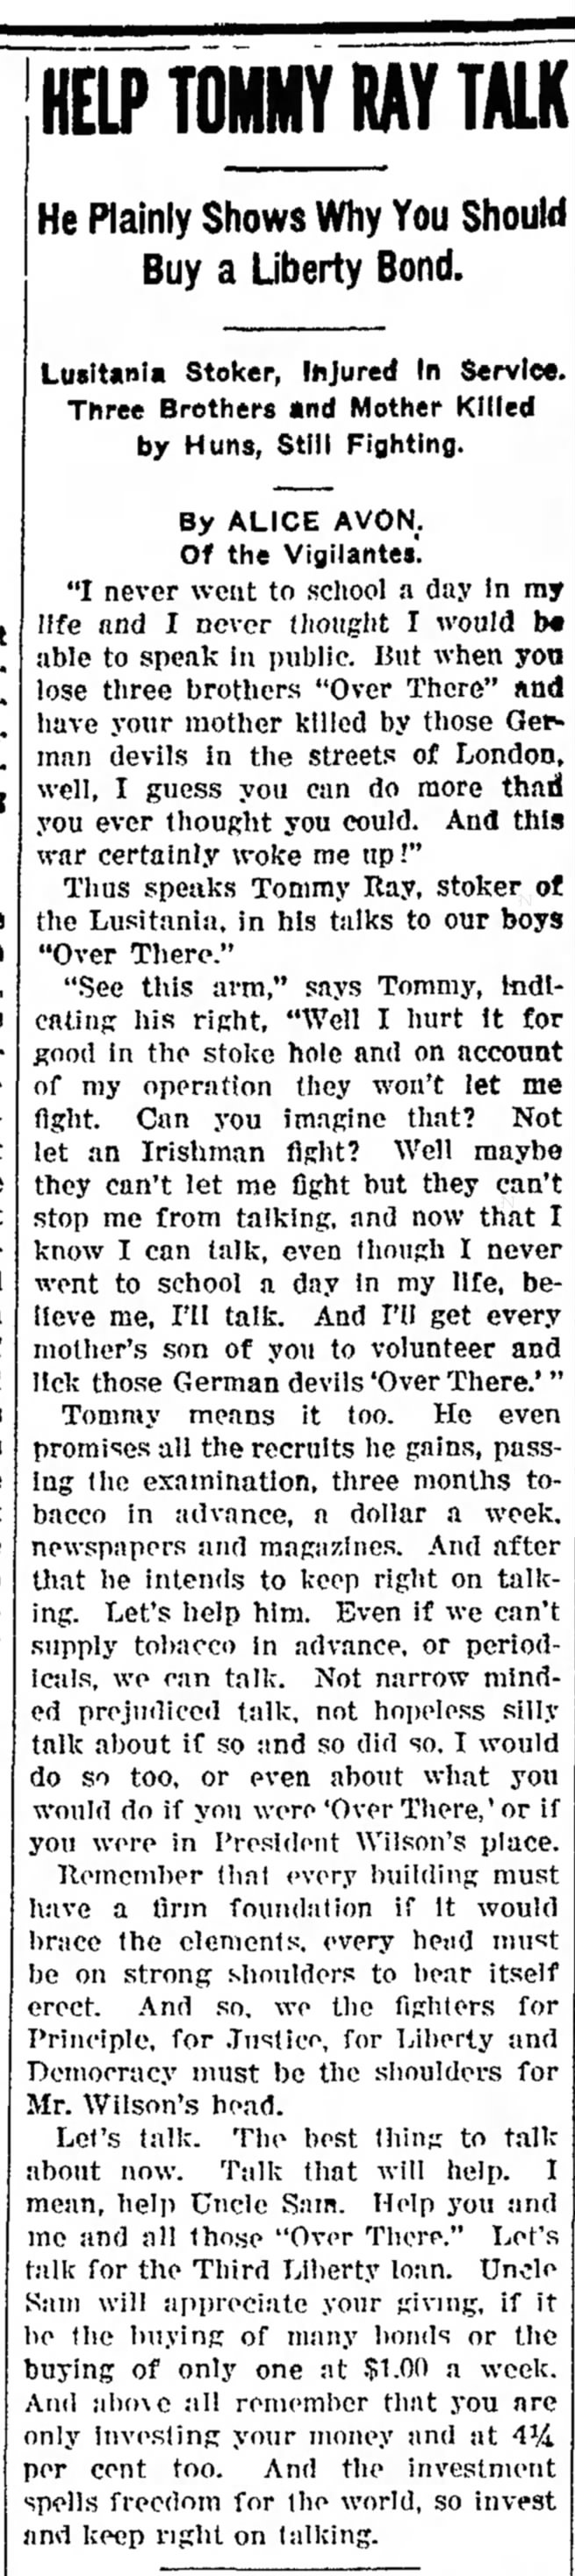 Tommy talks war in Big Piney, Wyoming on May 9, 1918.